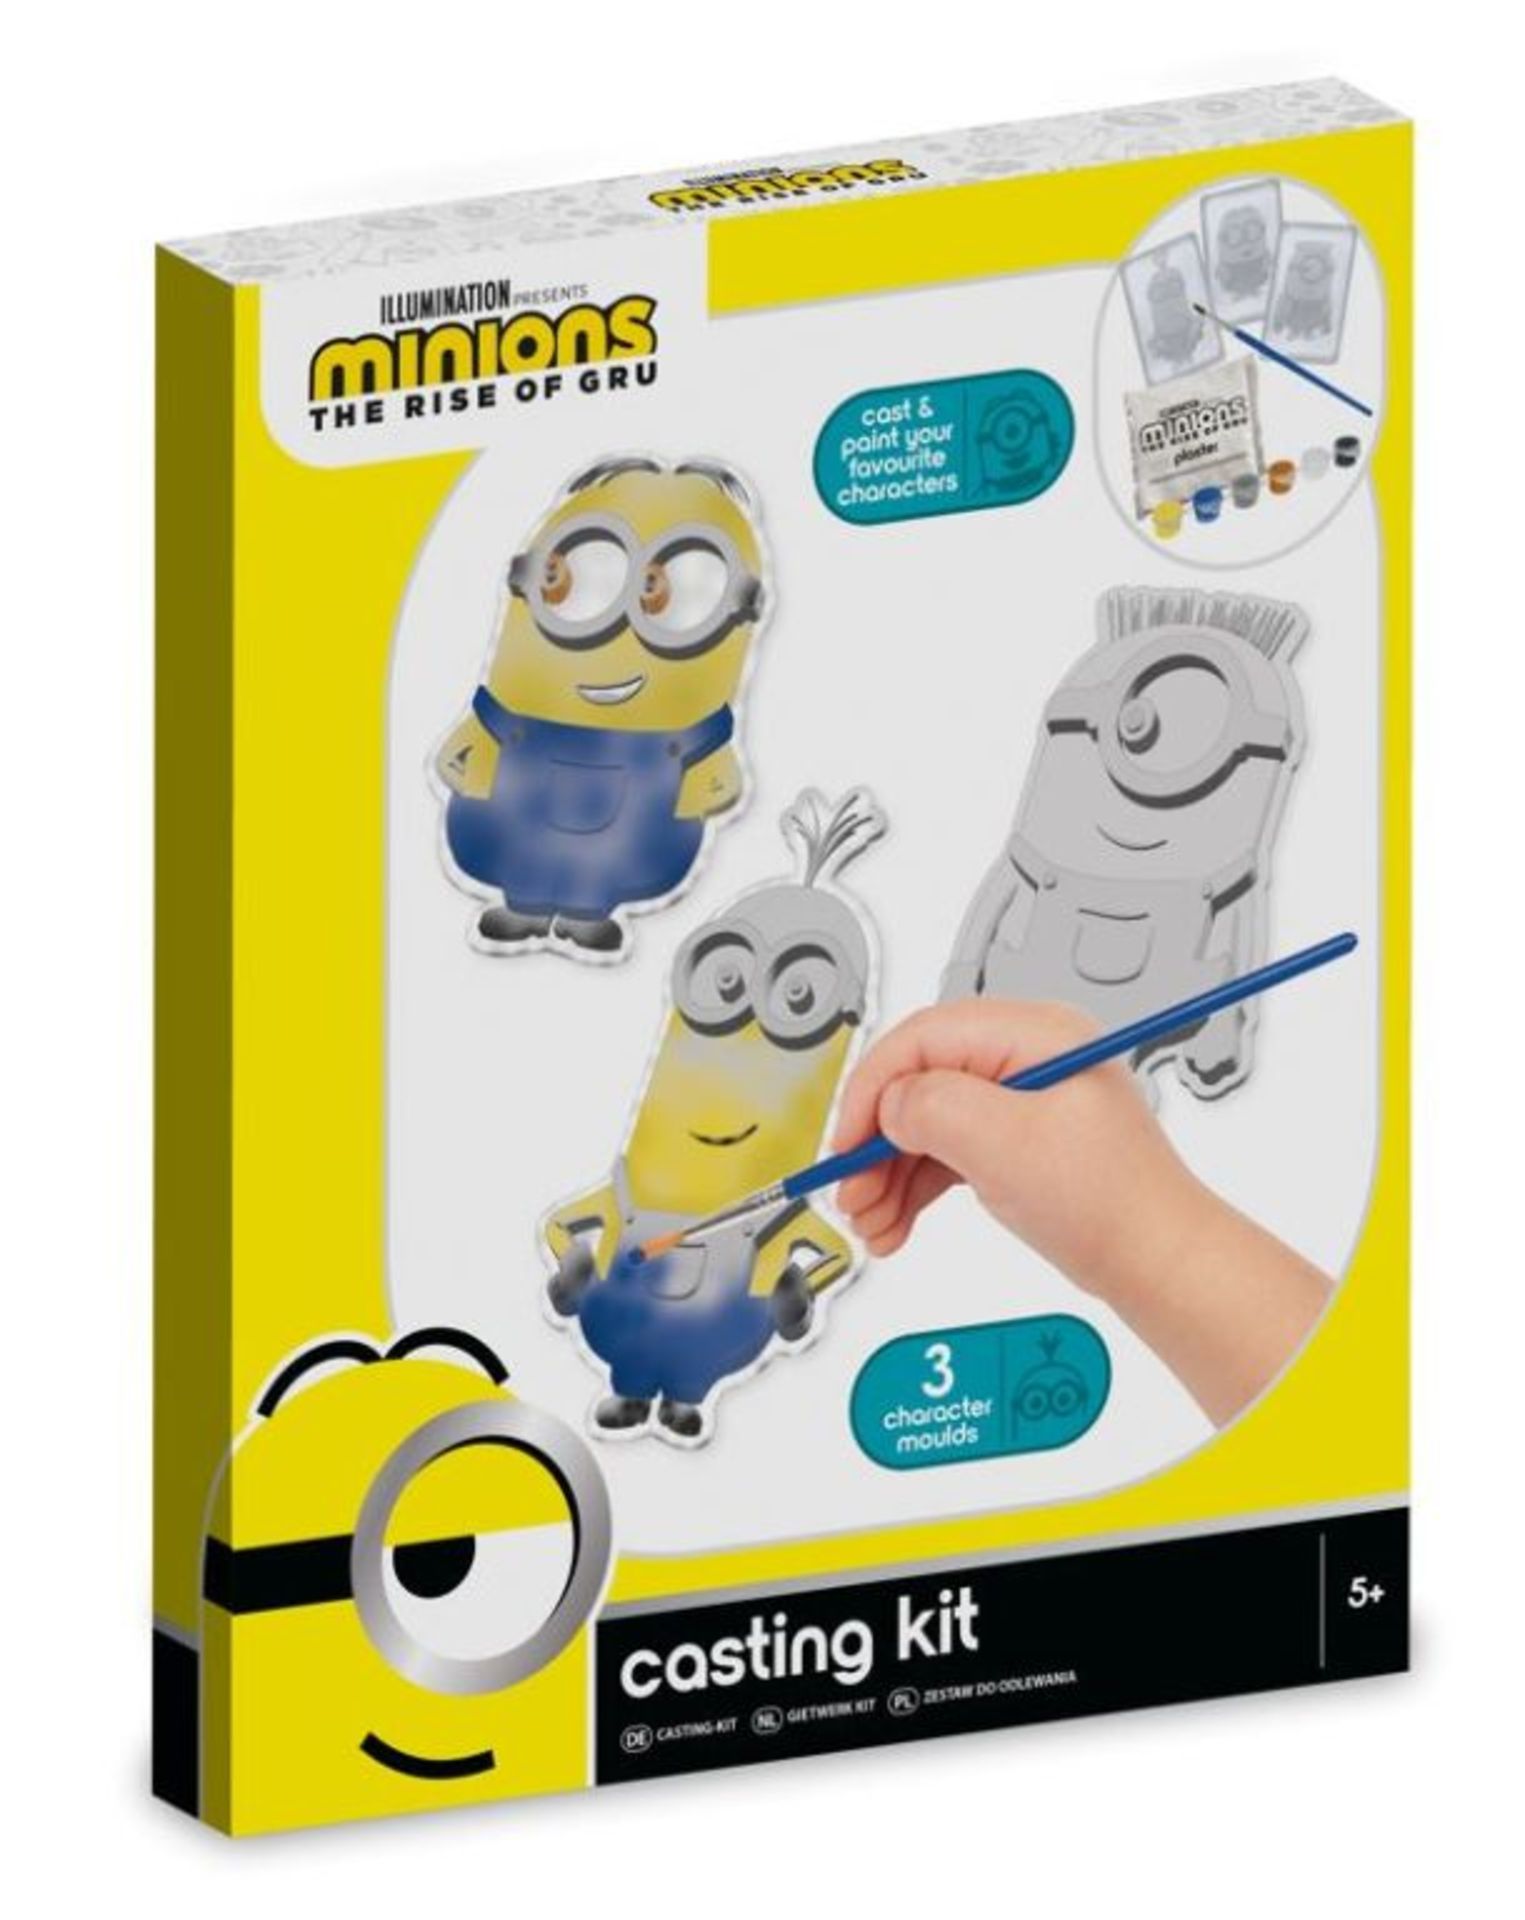 NEW MINIONS THE RISE OF GRU CASTING KIT